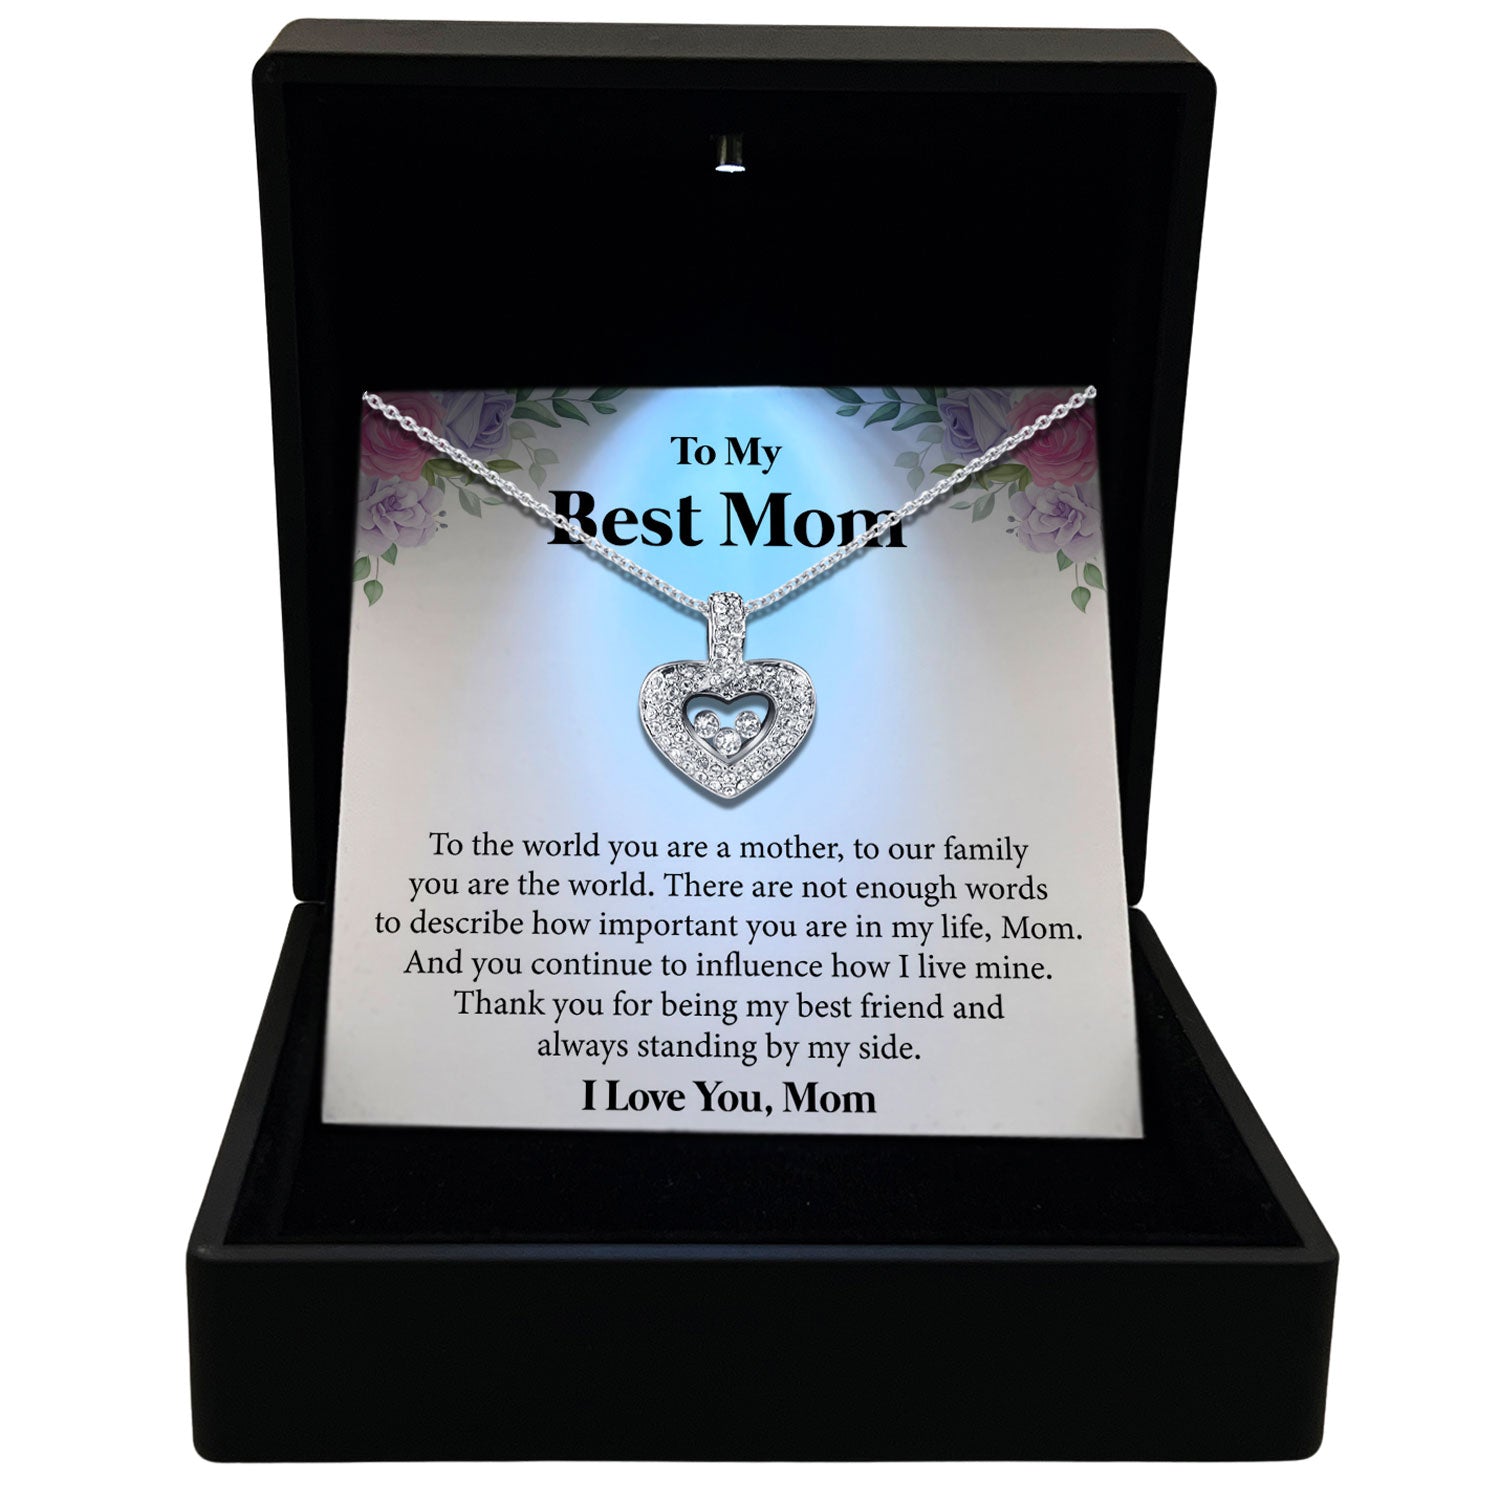 To My Best Mom - Thank You For Being My Best Friend - Tryndi Floating Heart Necklace